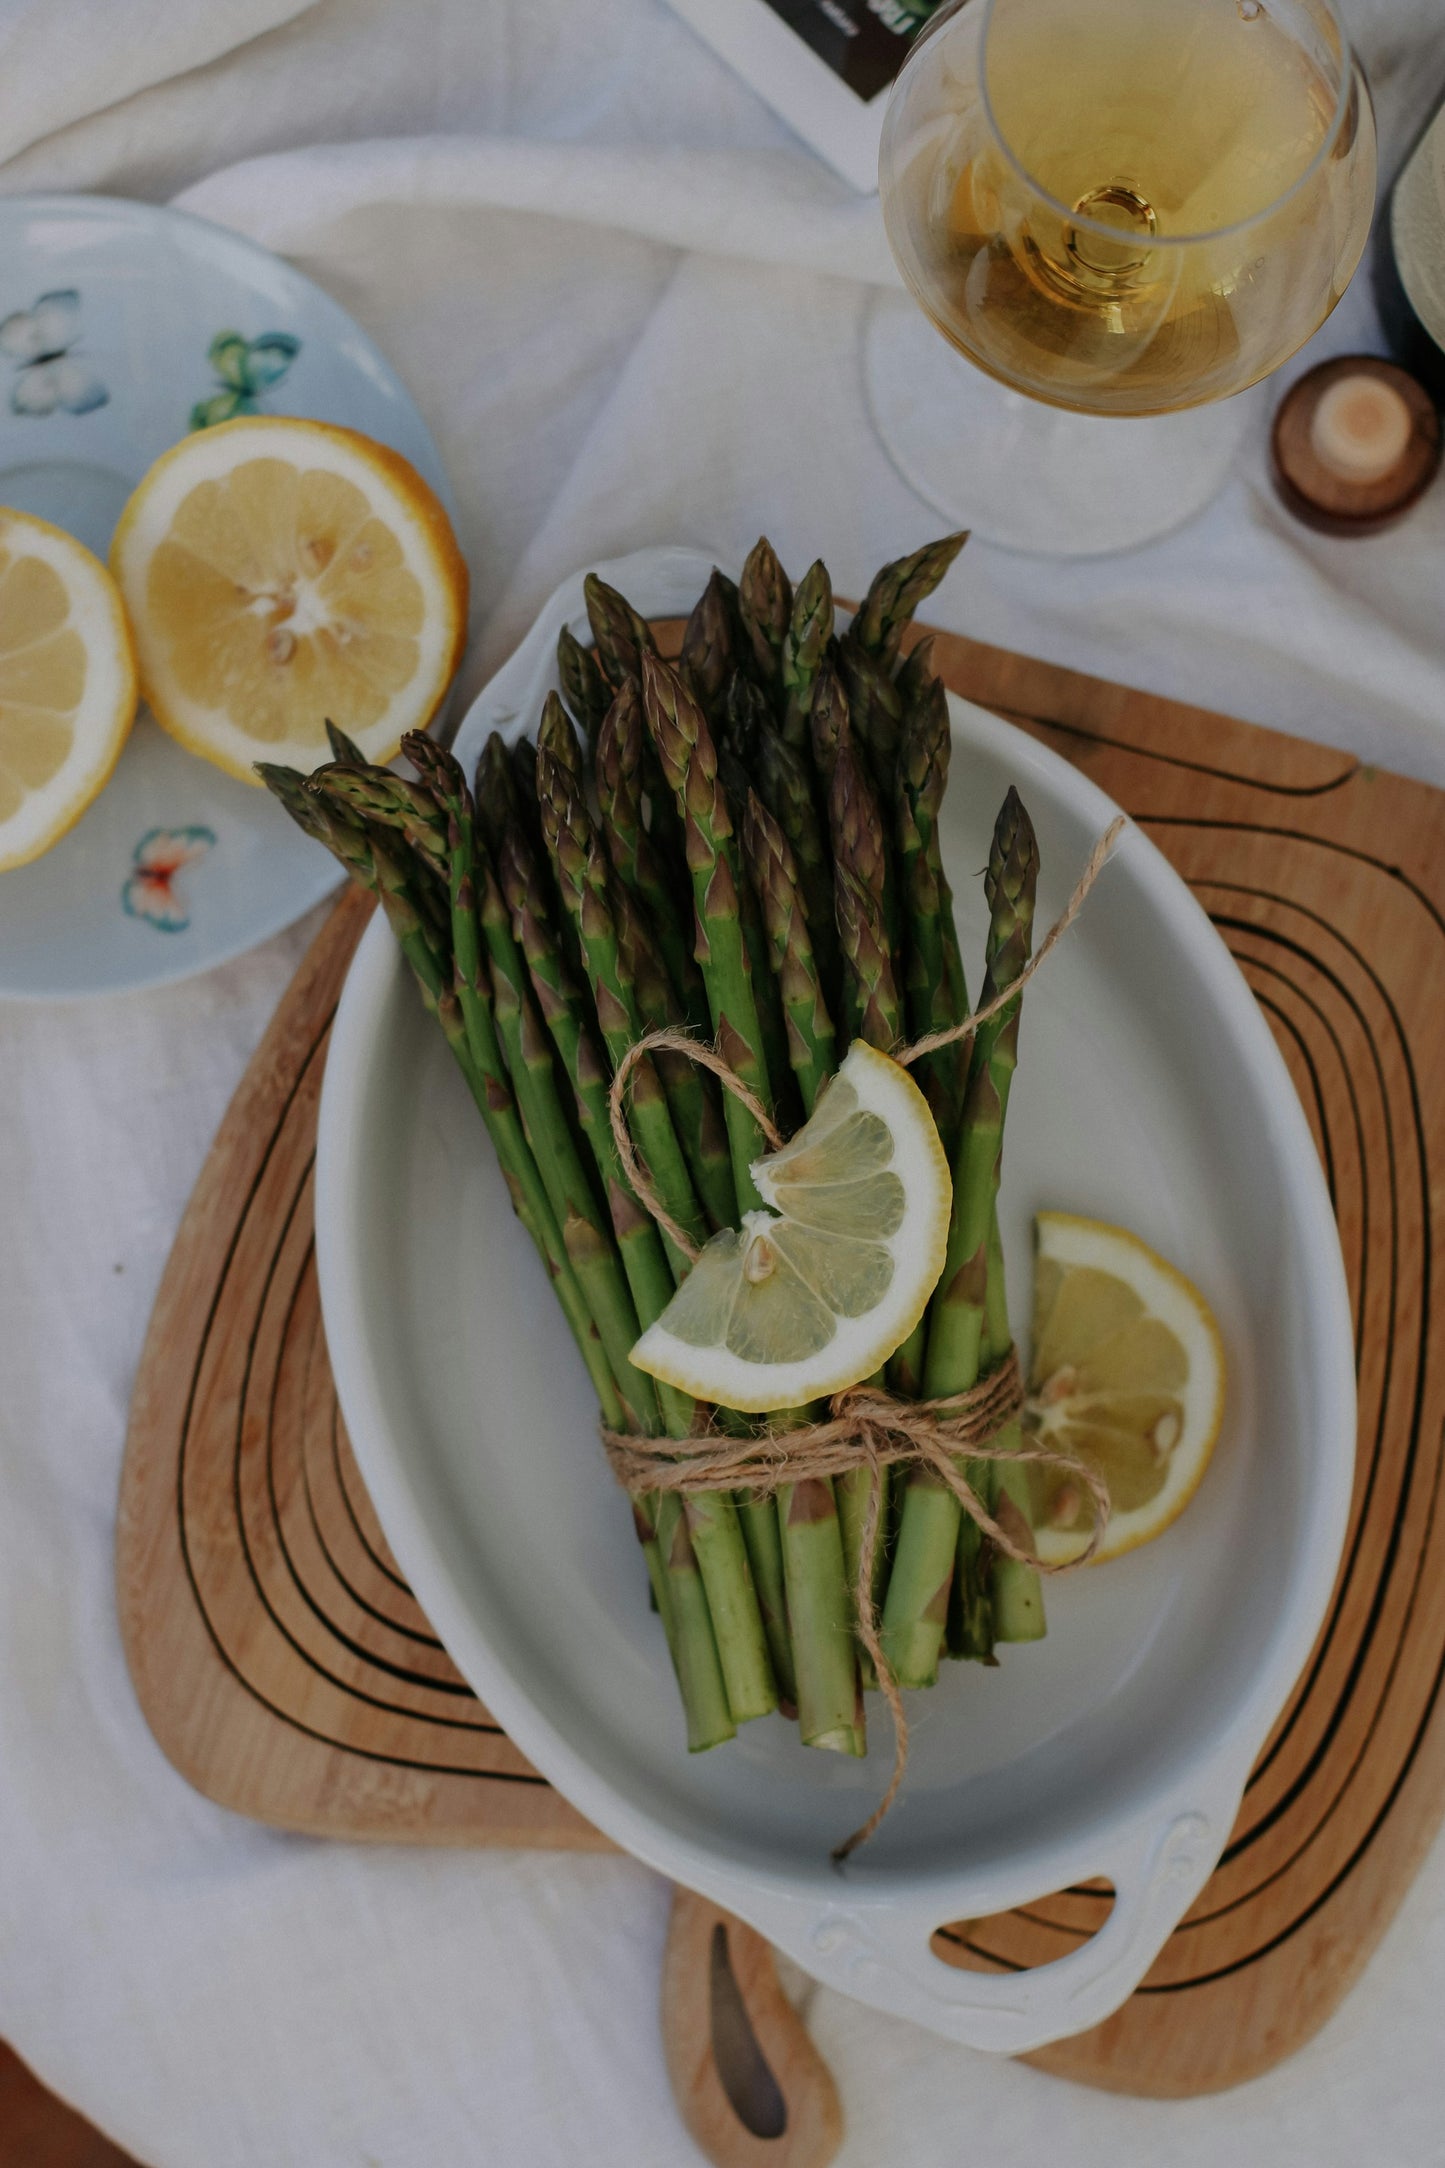 Asparagus, of the variety called, "Mary Washington," previously harvested. There is a collection of asparagus spears, with cooking twine tying them together, within a white porcelain serving dish.  Lemon is adorned on top. 